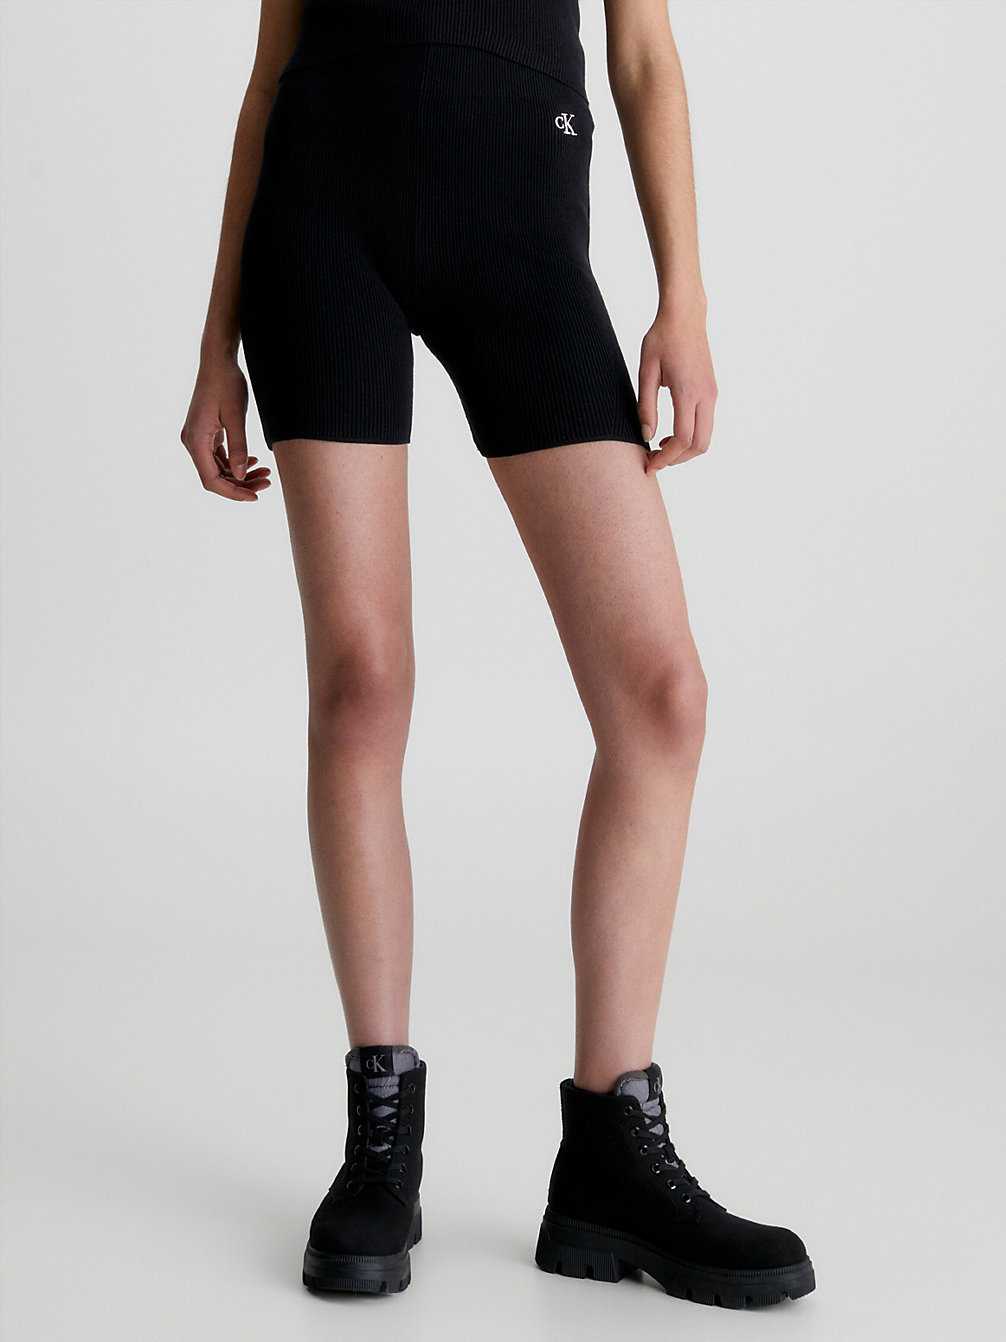 CK BLACK > Ribbed Cycling Shorts > undefined Женщины - Calvin Klein